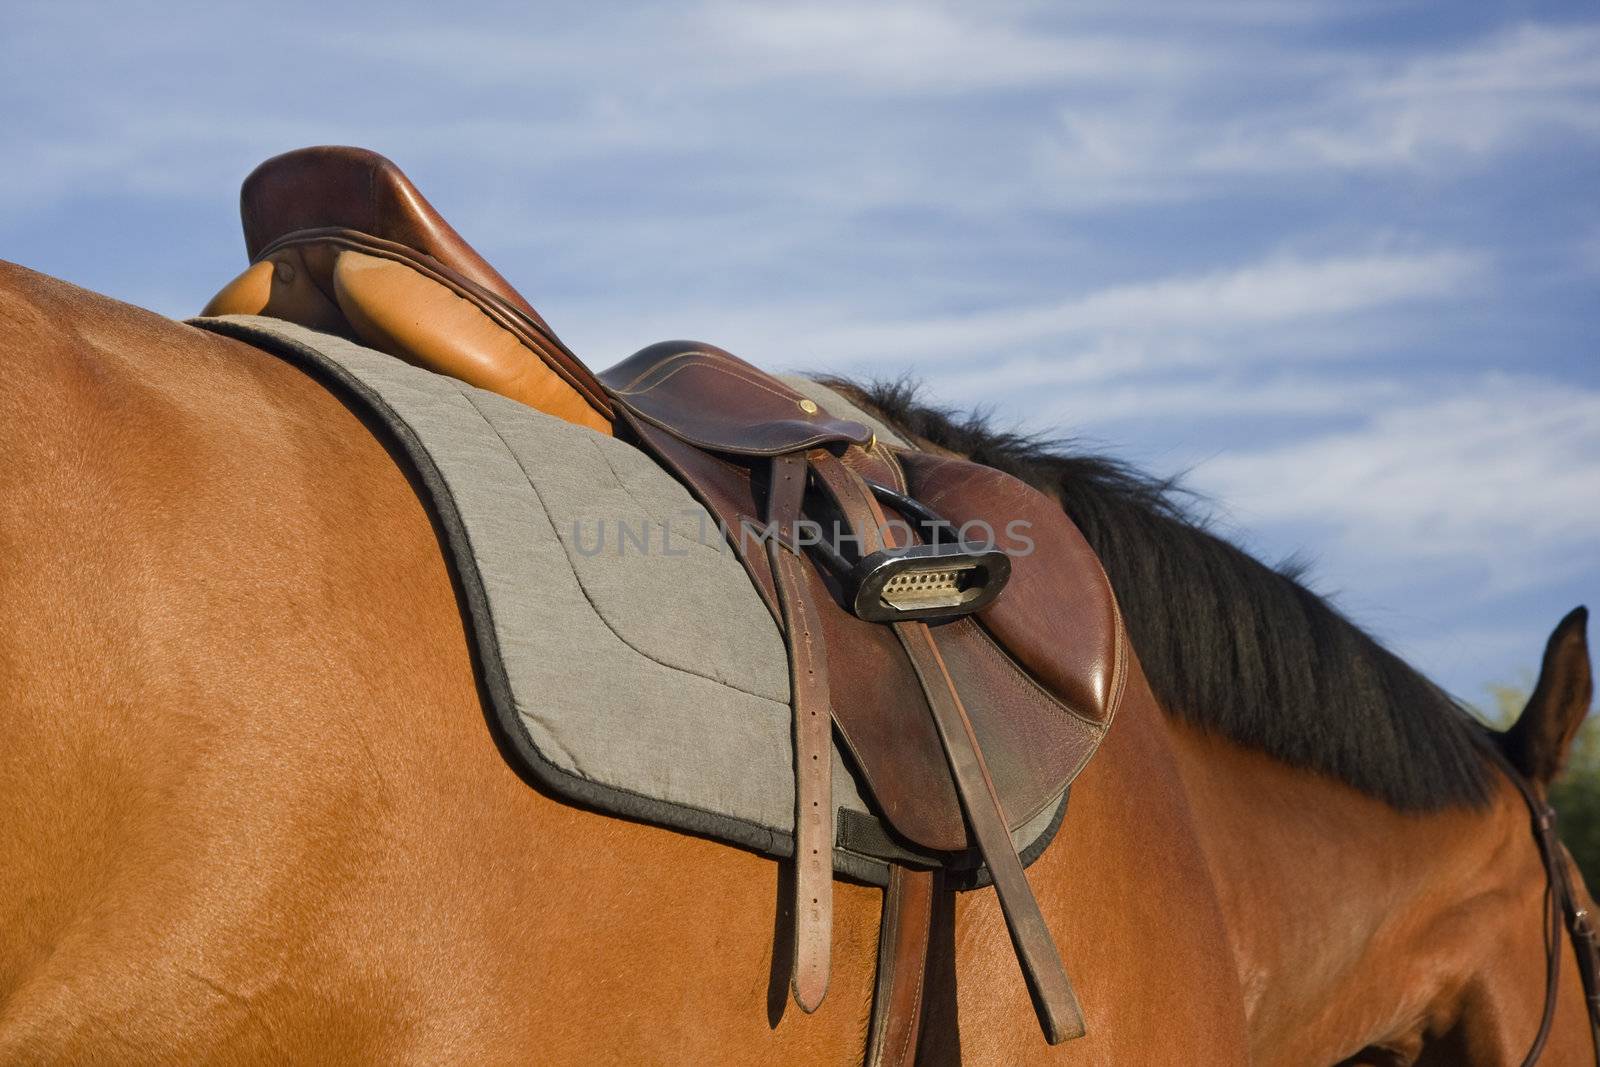 English style saddle on a bay horse, dusty after jumping training, shot against sky